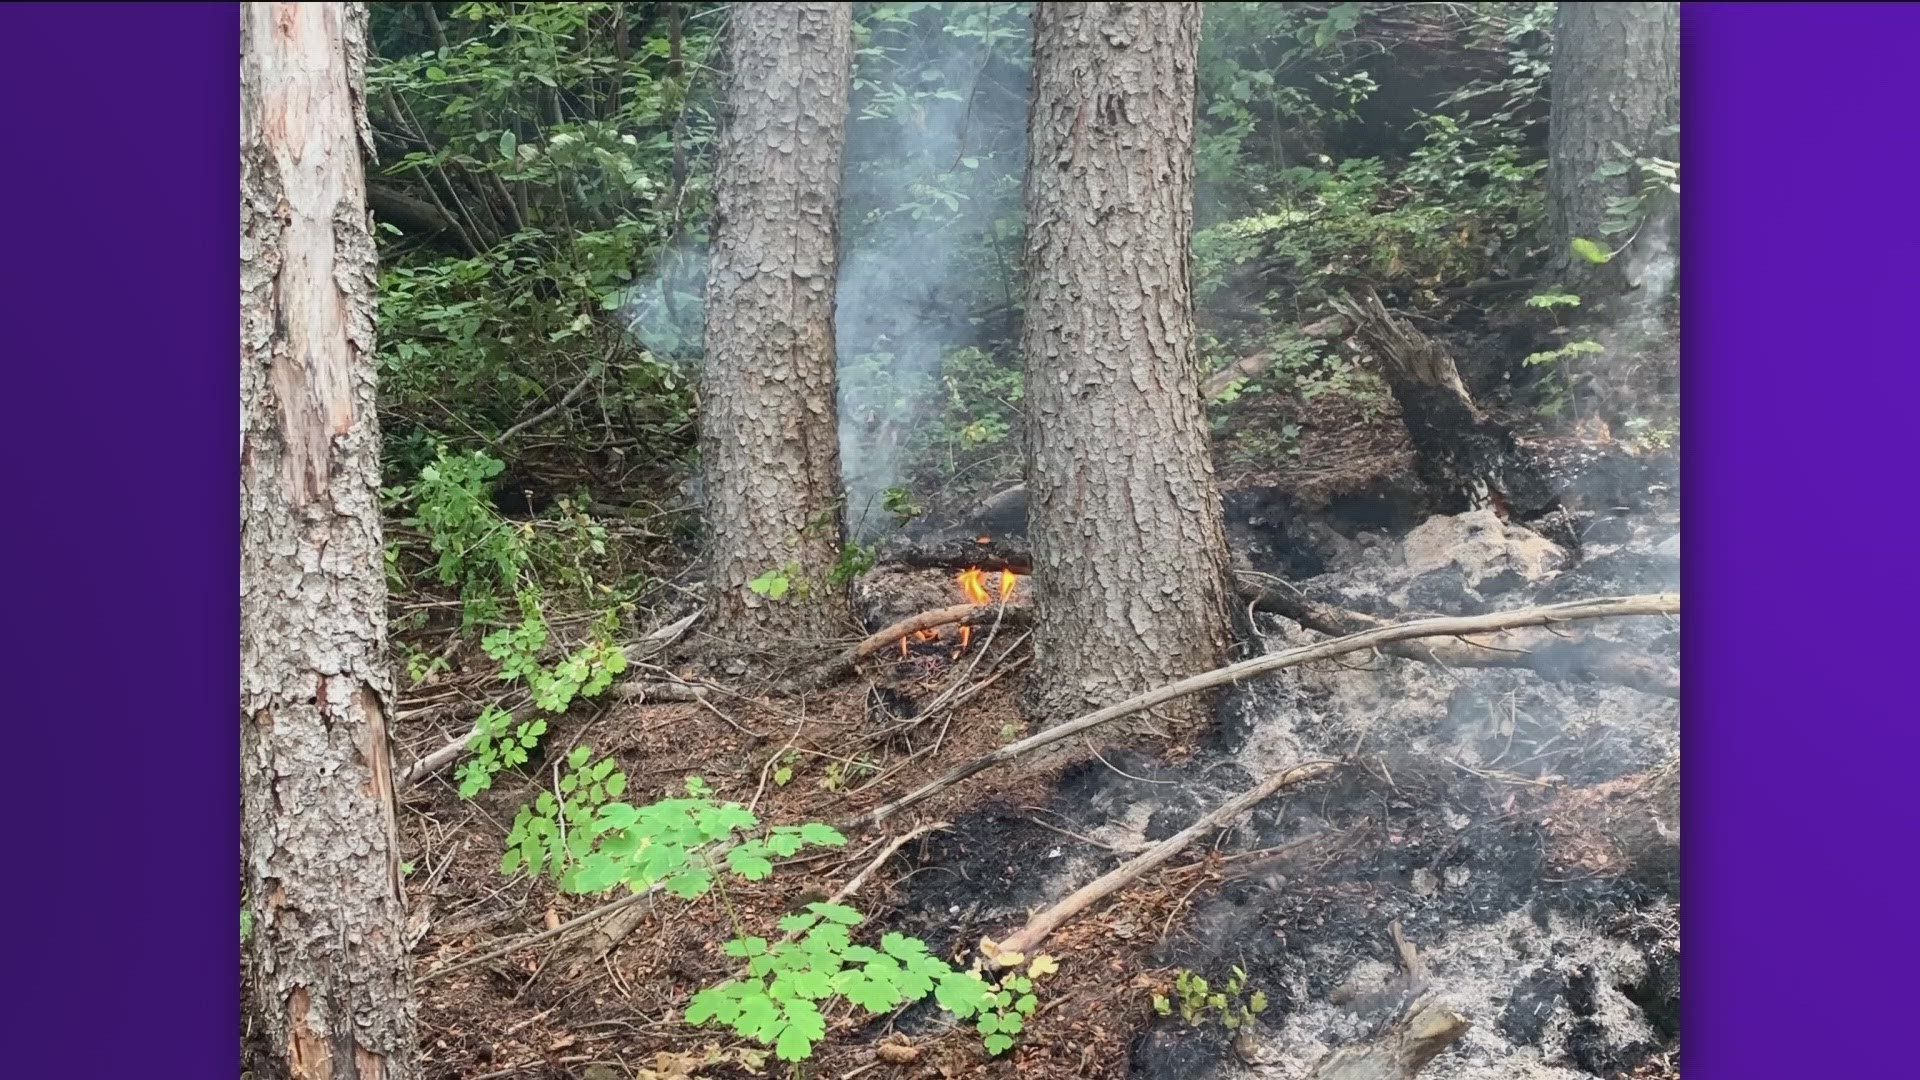 Widespread rain showers helped firefighters maintain acreage and containment. Crews have also made progress removing hazardous, flammable trees and debris.